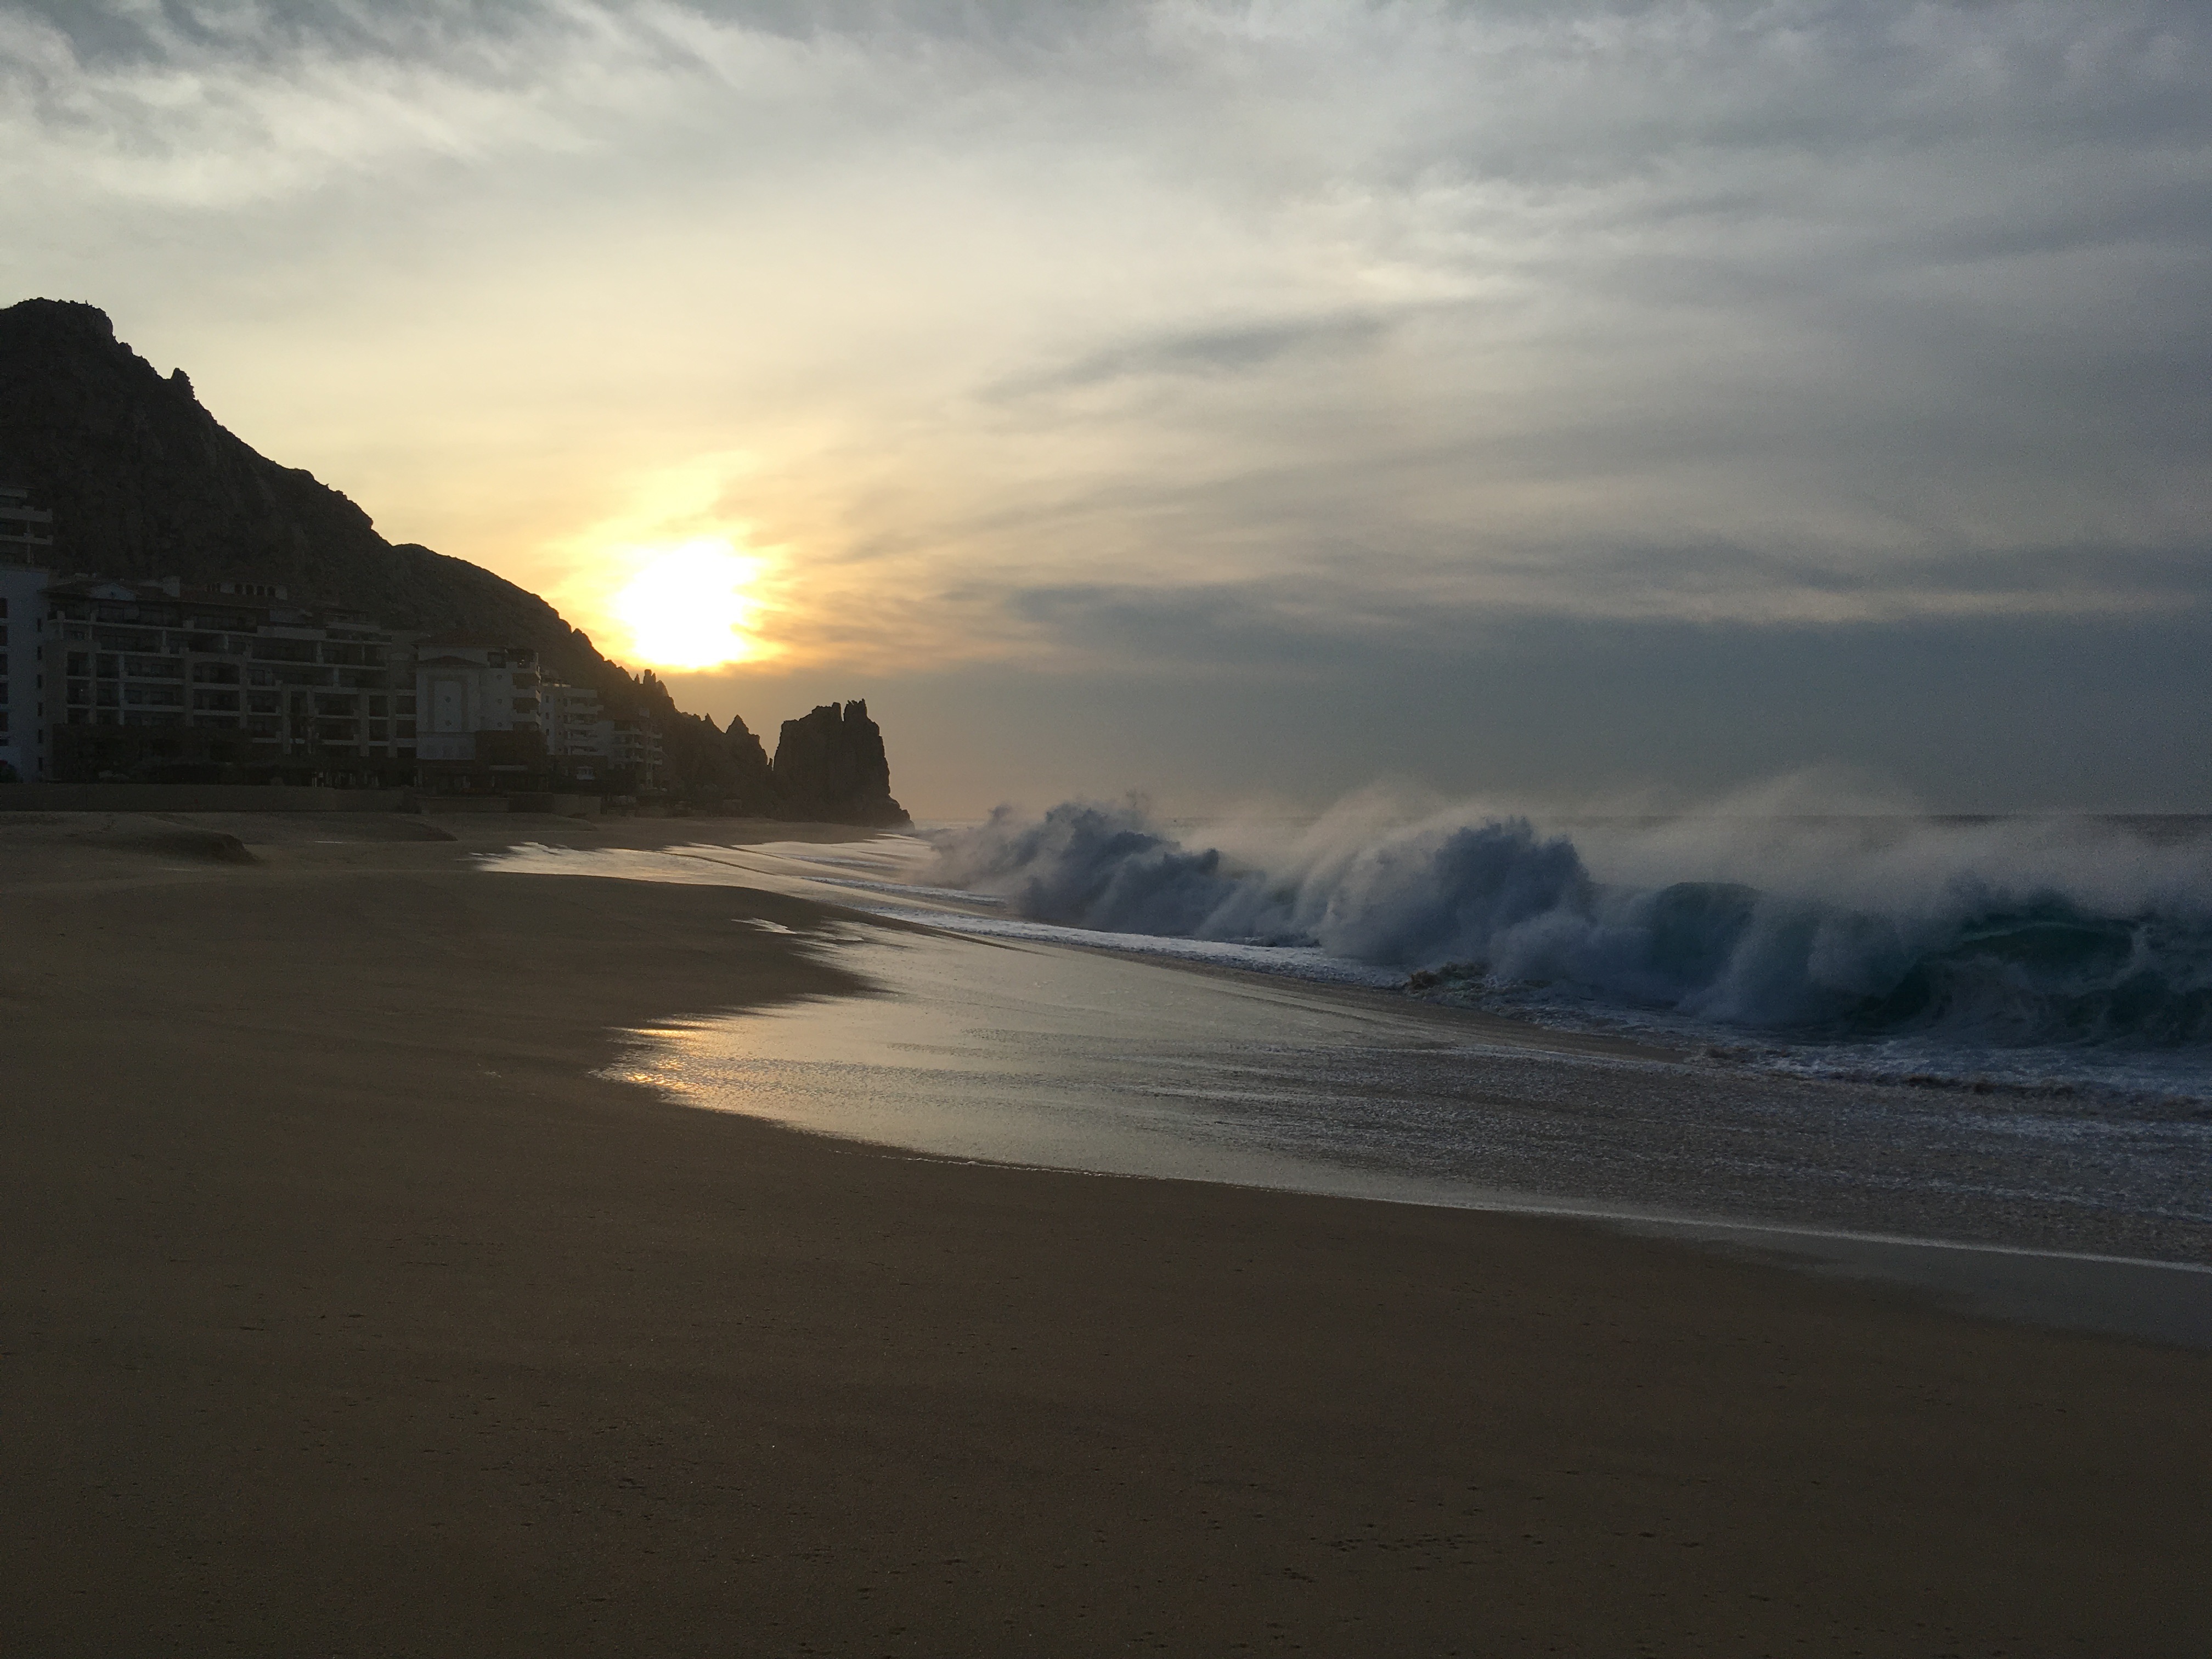 ocean and sunset view from terrasol beach resort condos in cabo san lucas